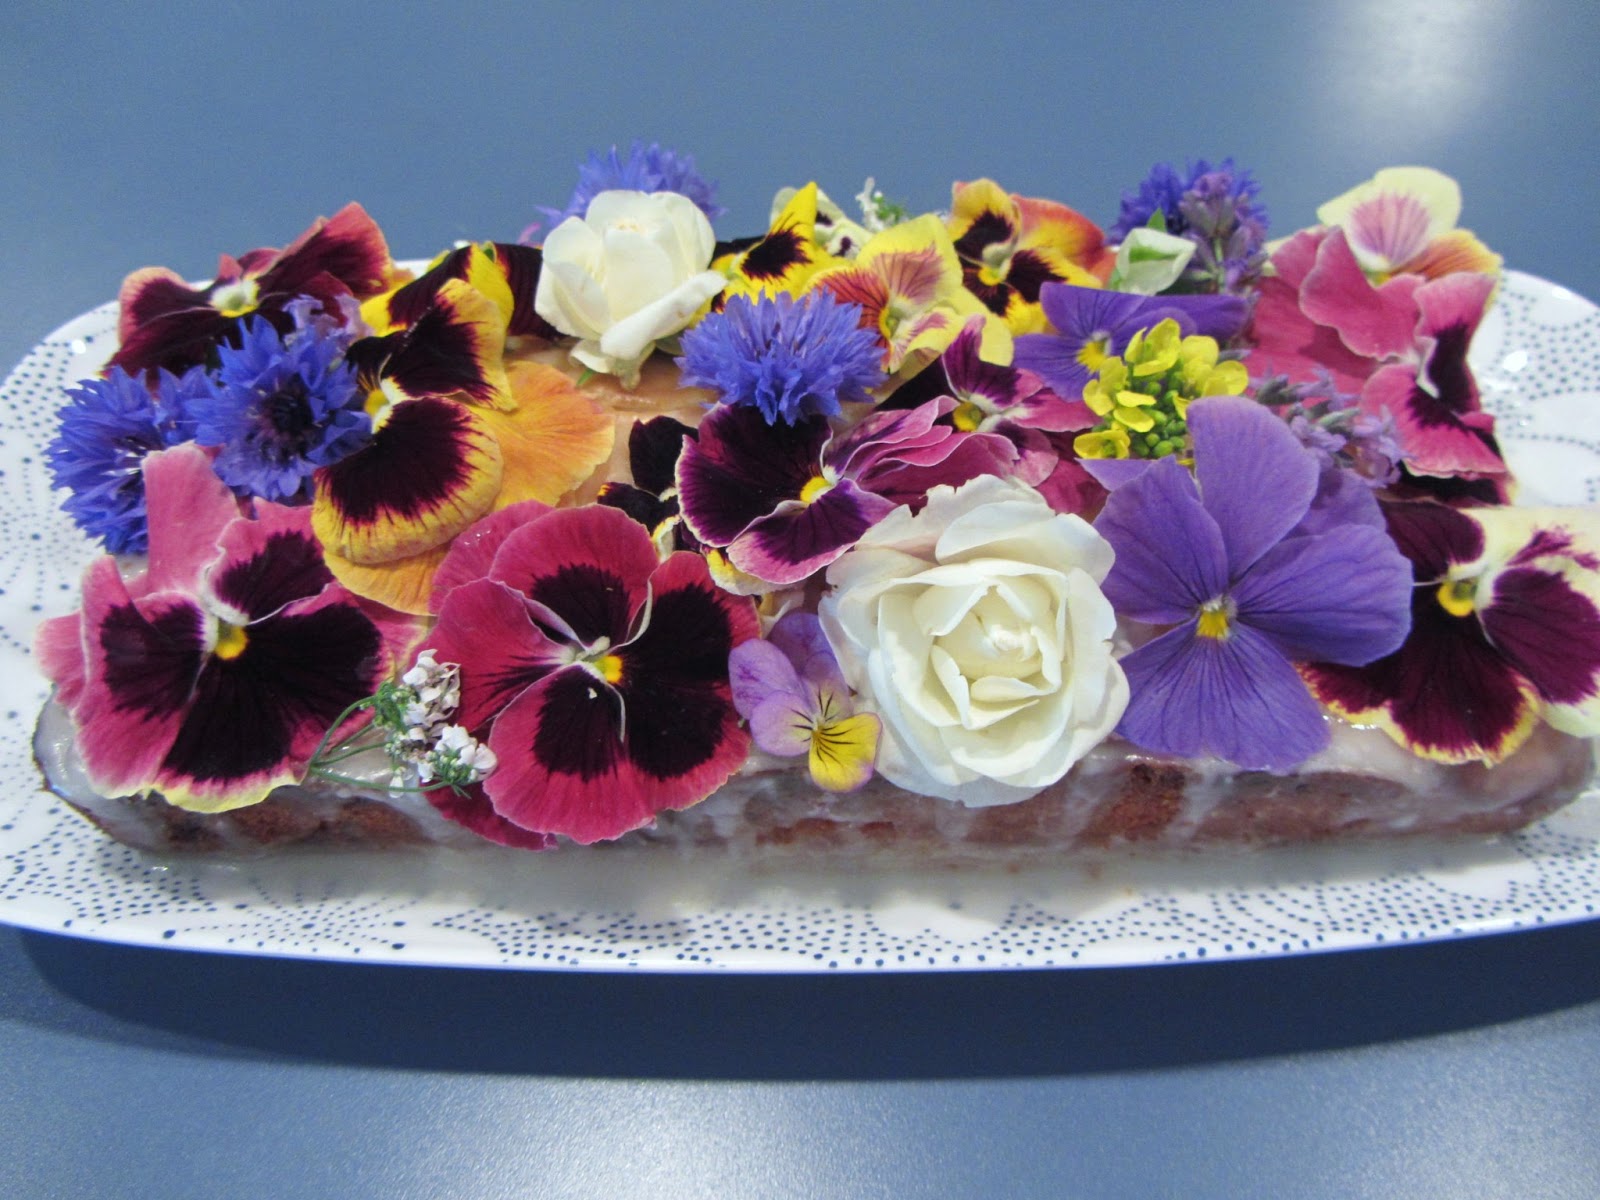 Moments of DelightAnne Reeves: Edible Flowers Make the Cake